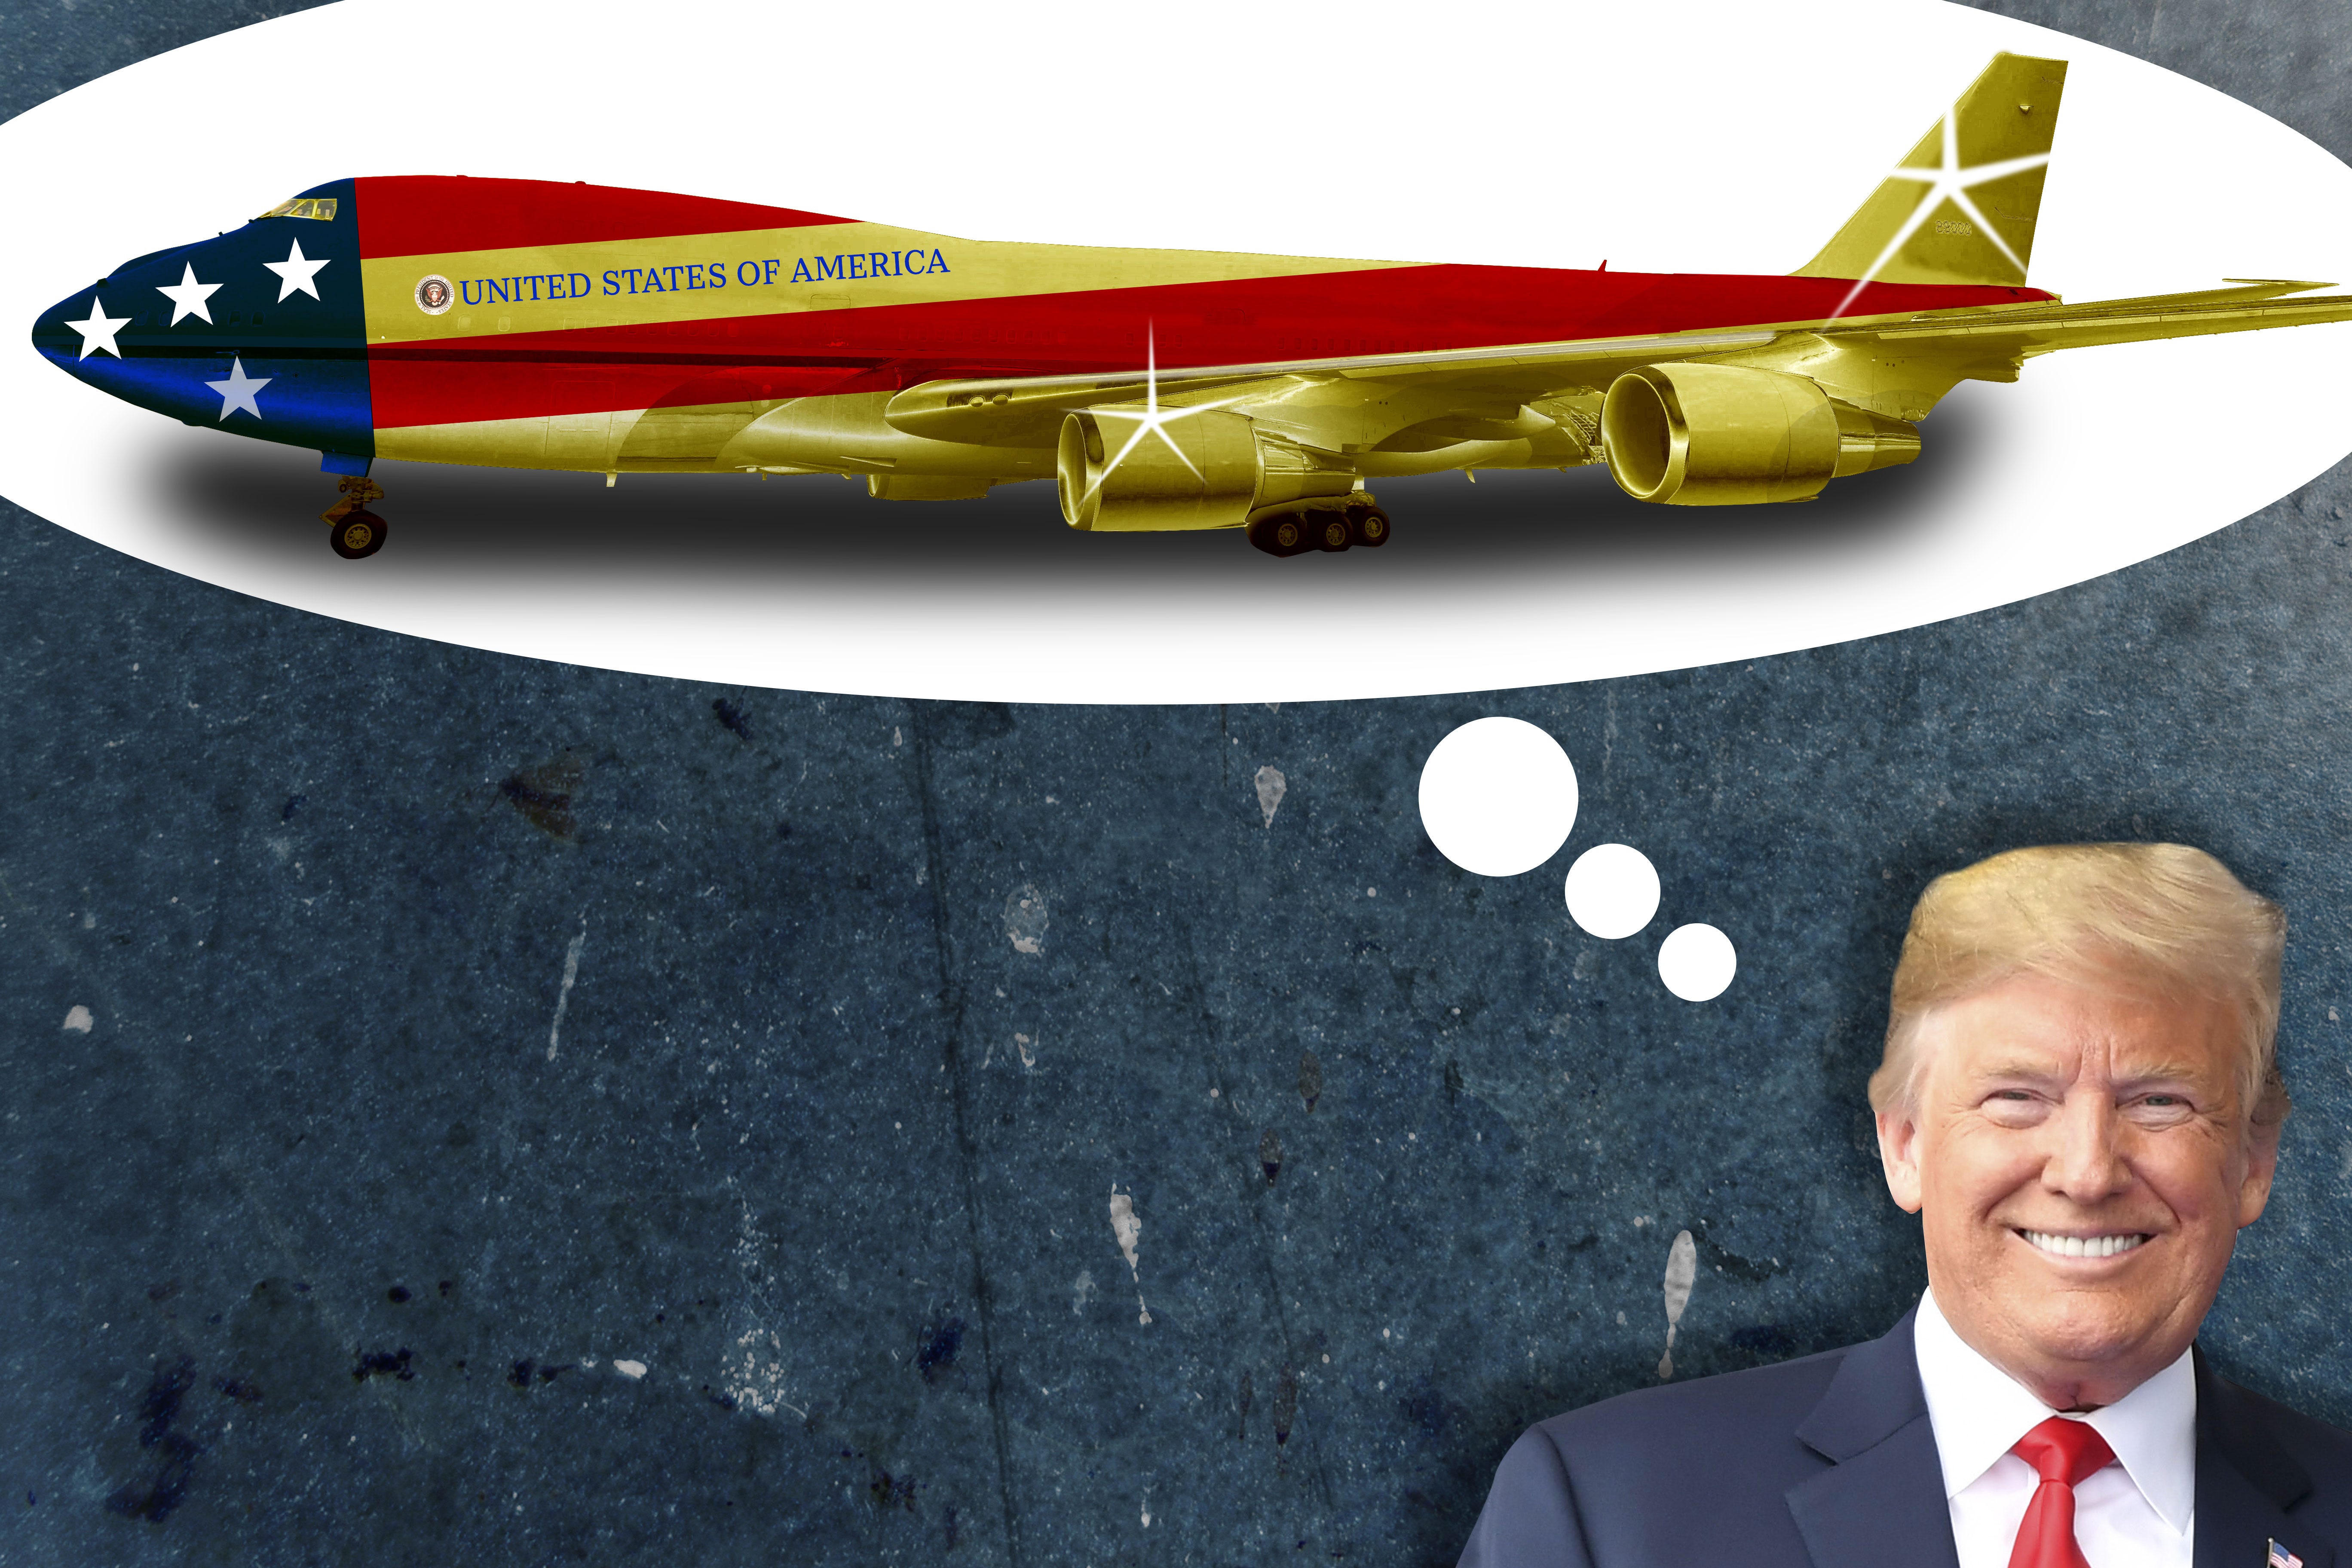 the new air force one design